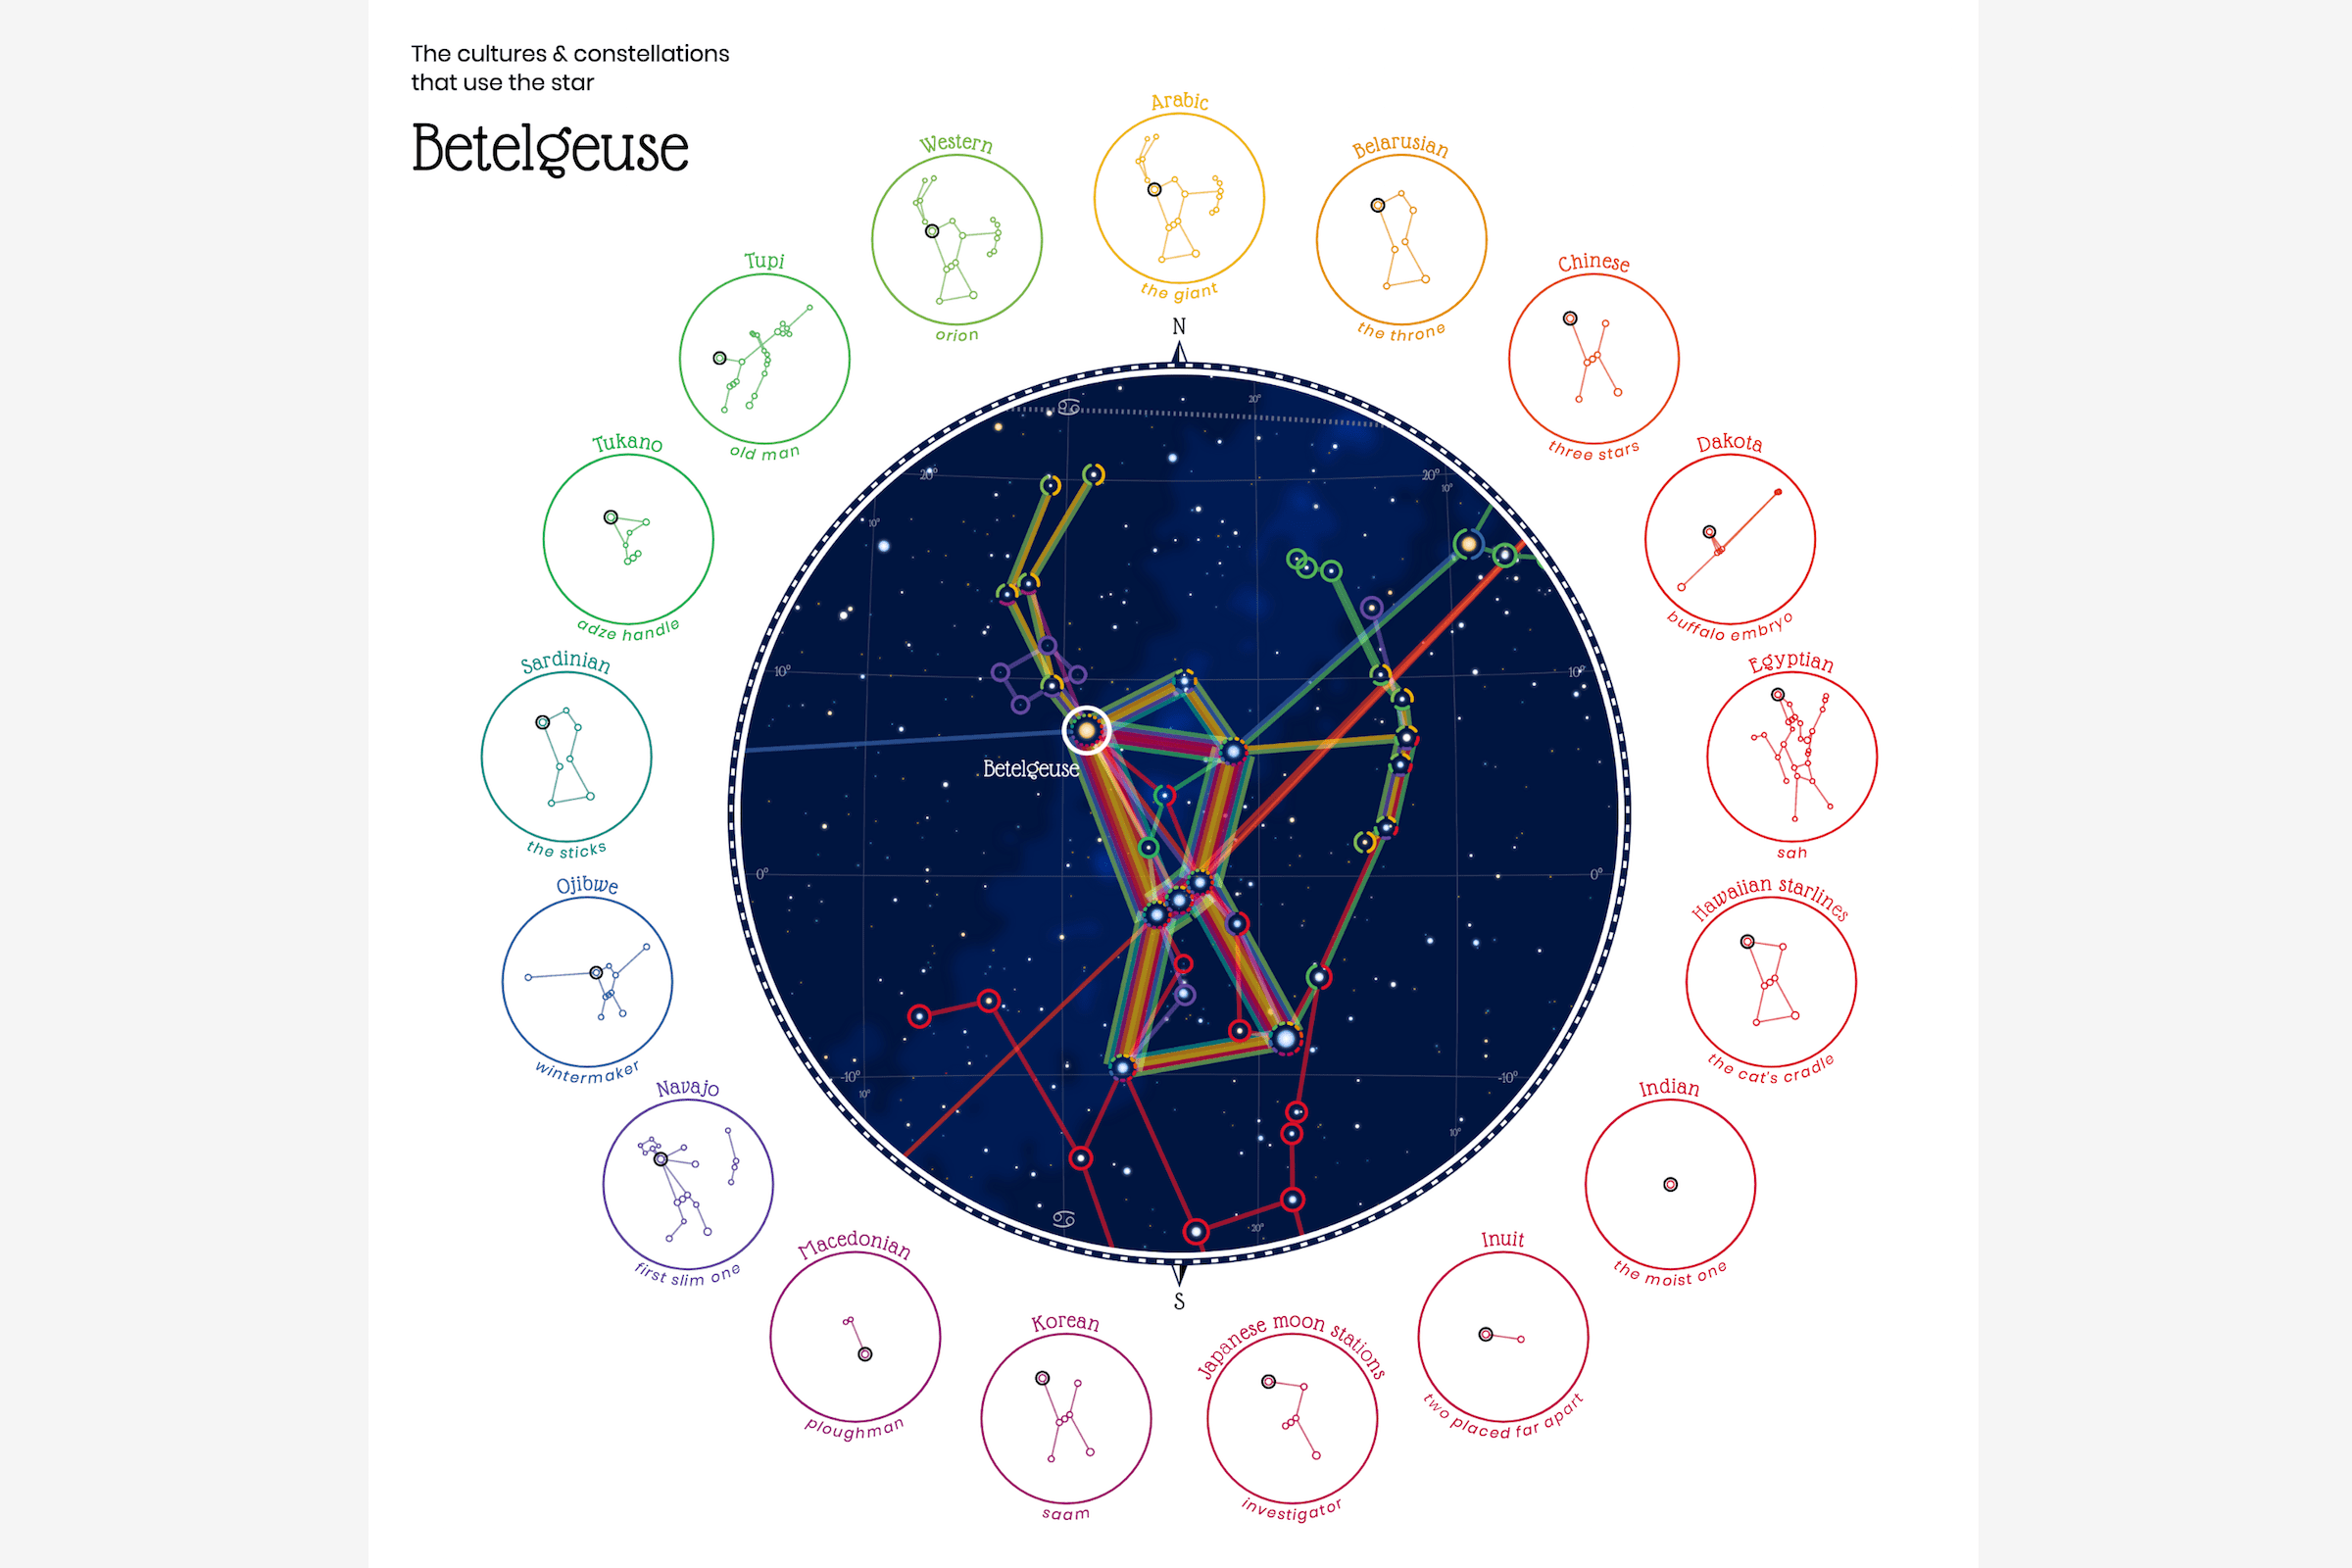 The circular sky map showing the star Betelgeuse